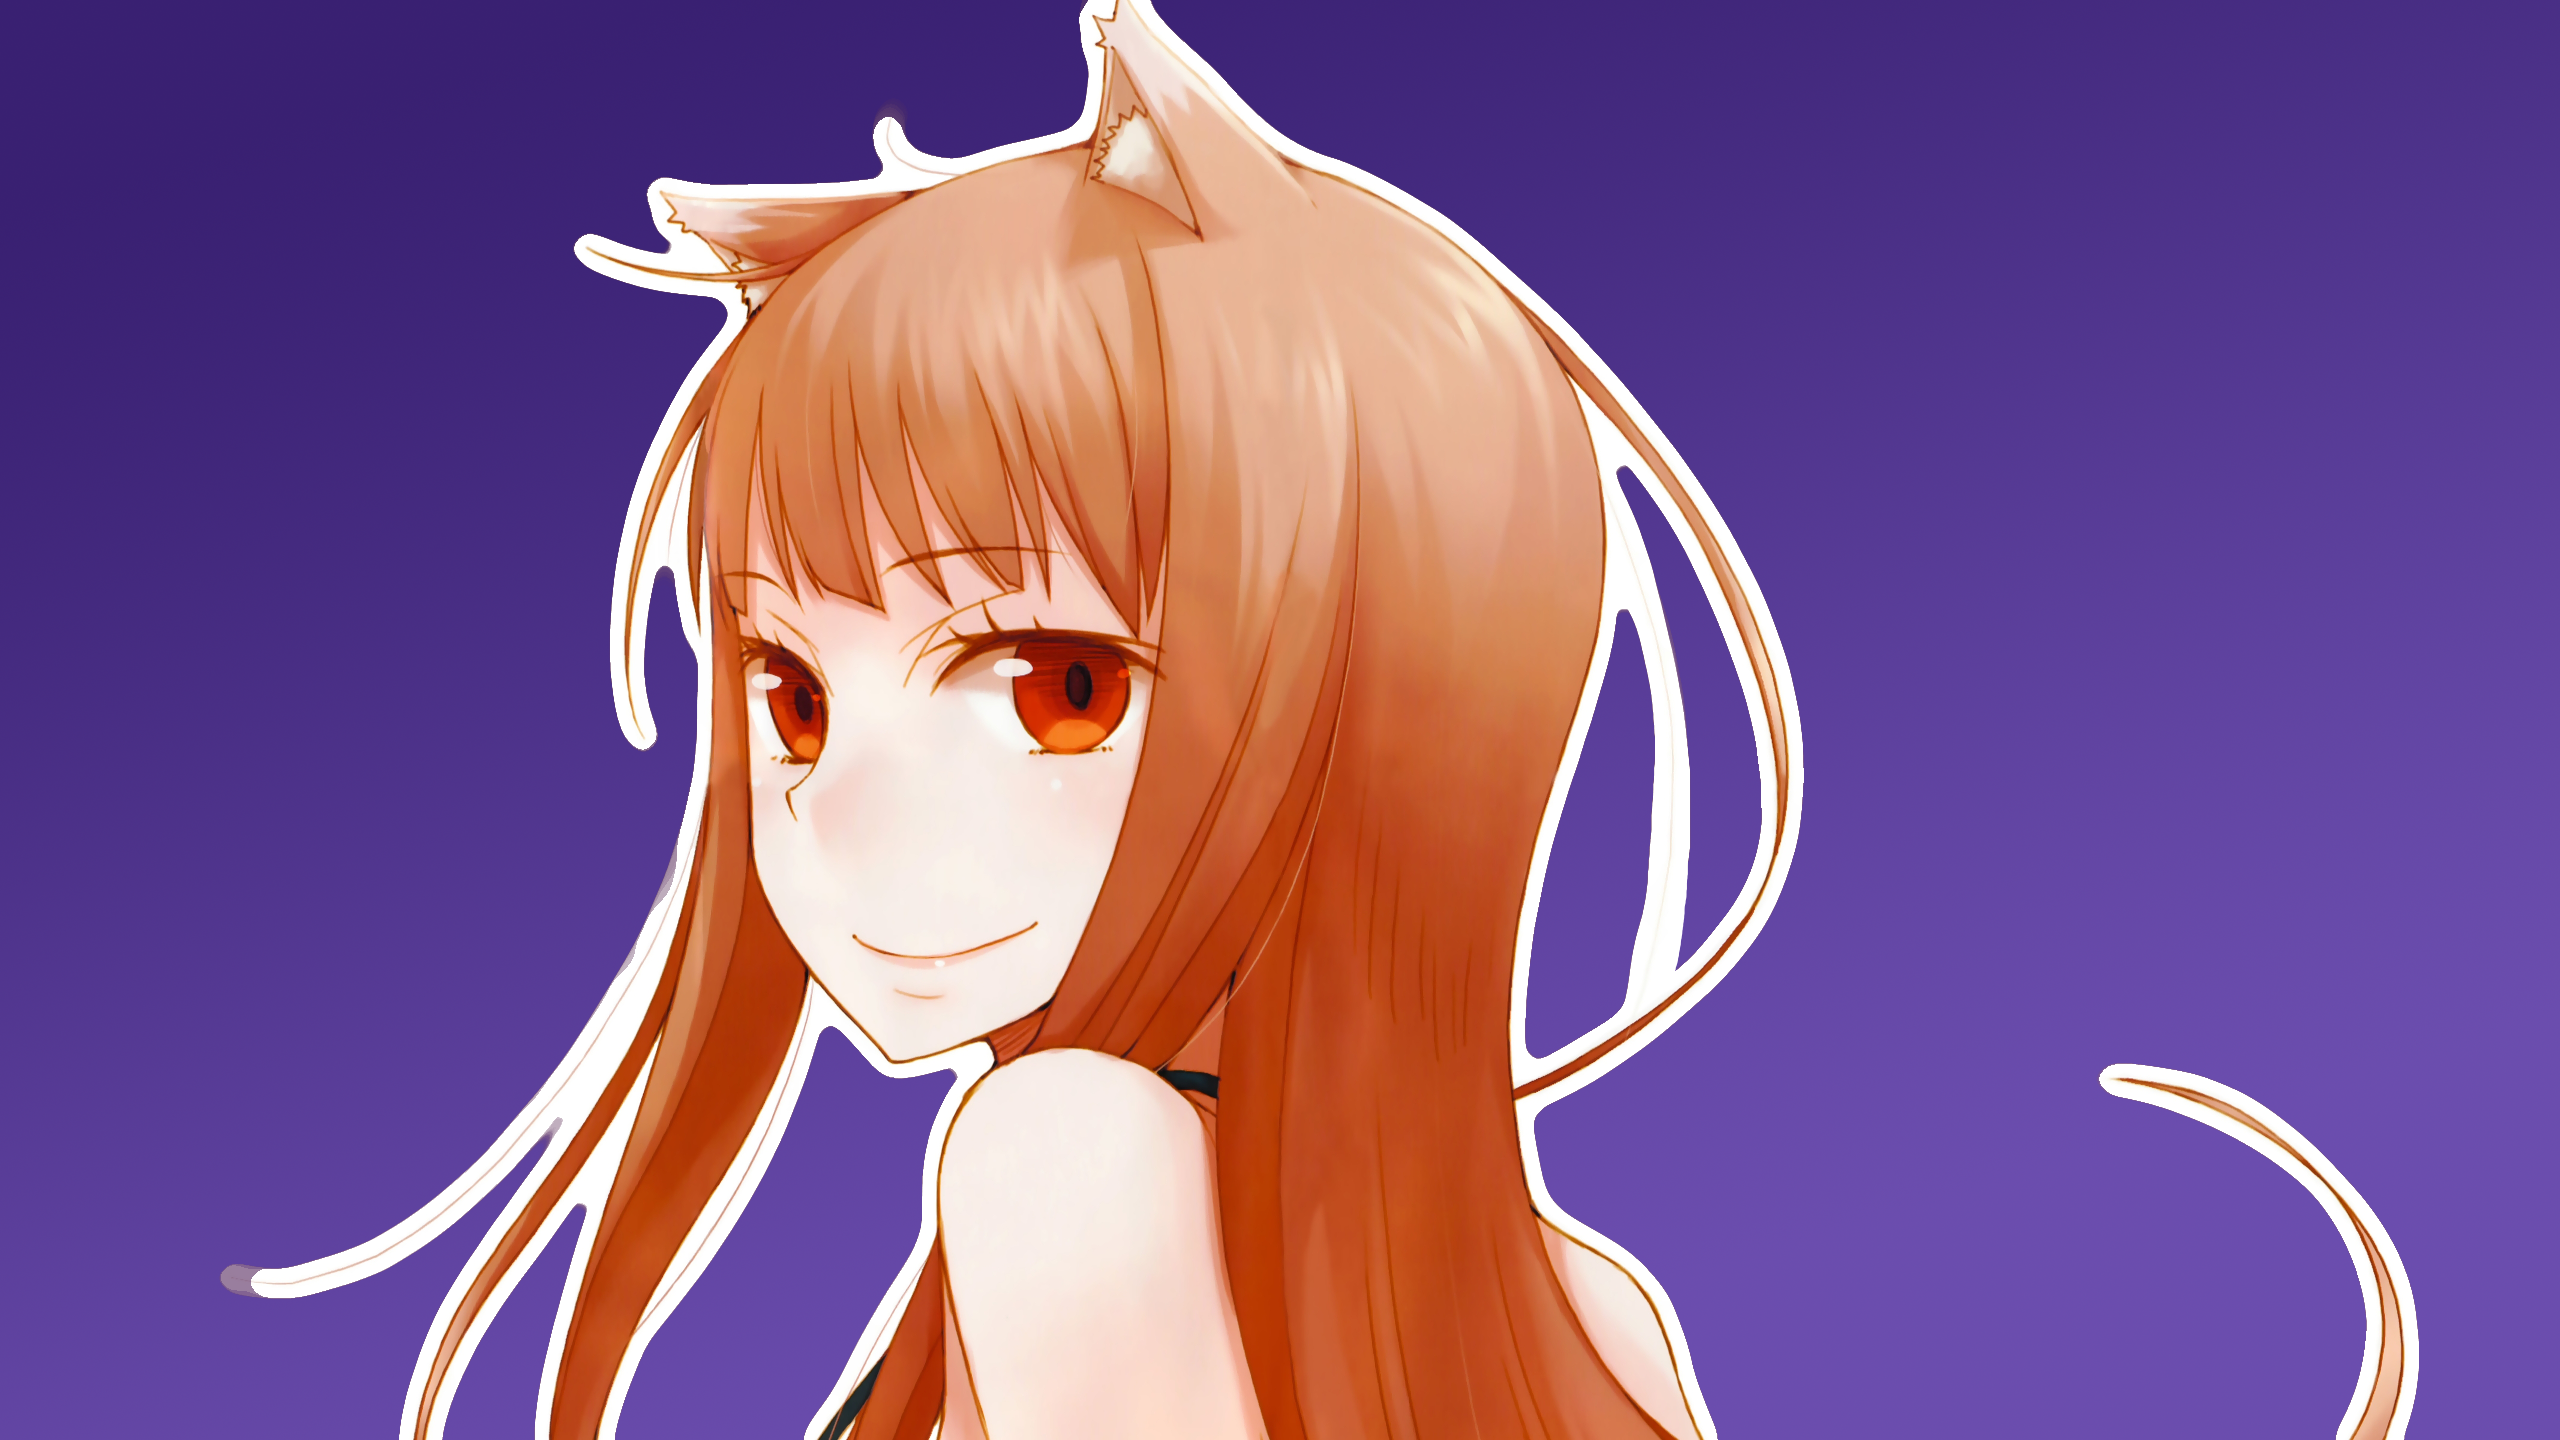 Anime Spice And Wolf 2560x1440